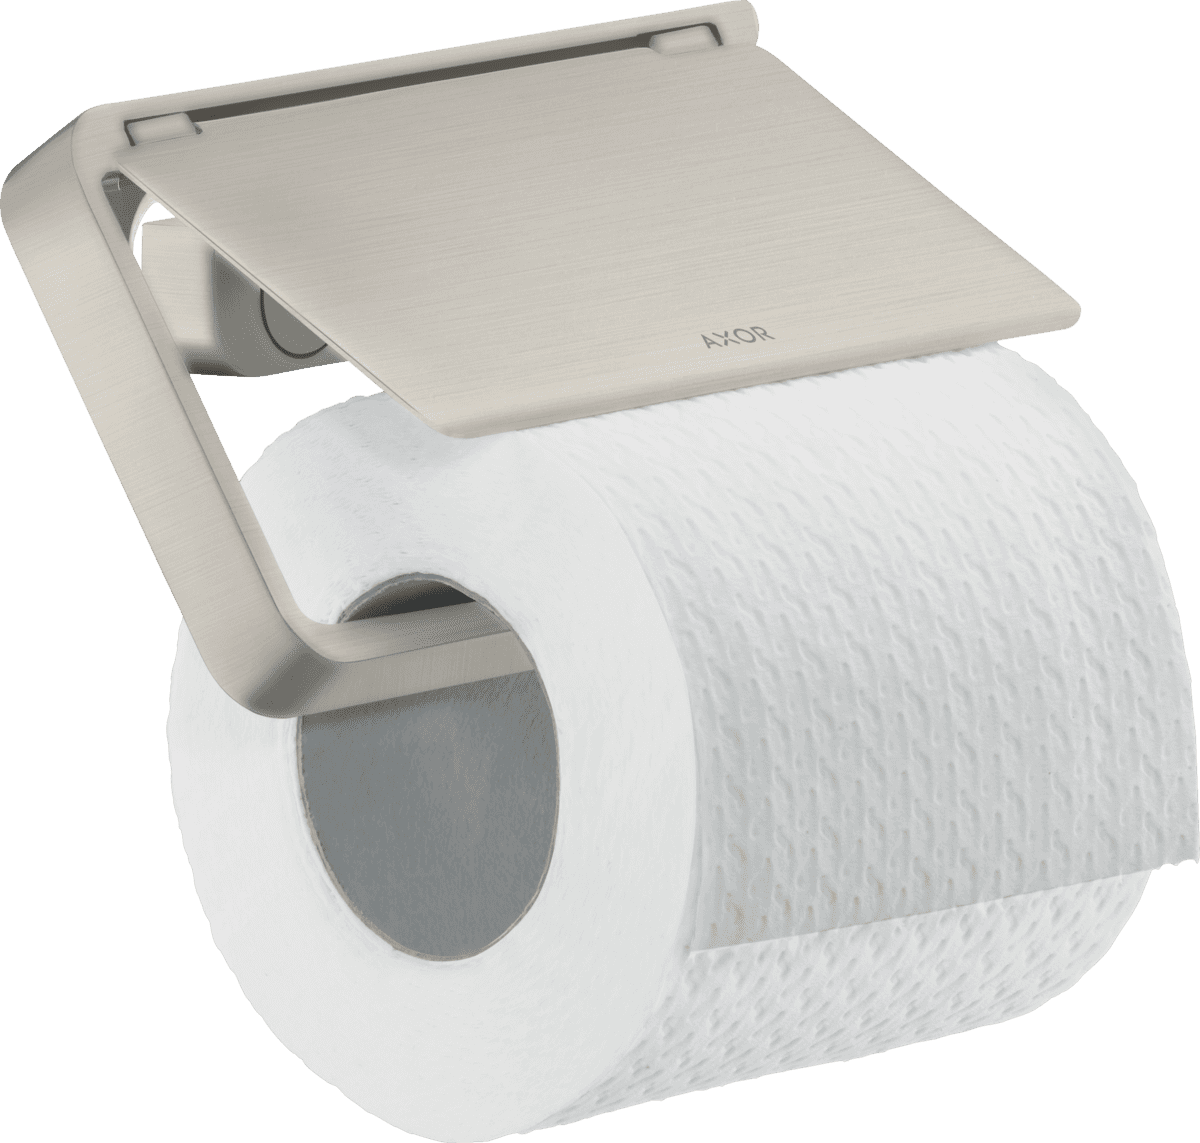 Picture of HANSGROHE AXOR Universal Softsquare Toilet paper holder with cover #42836800 - Stainless Steel Optic